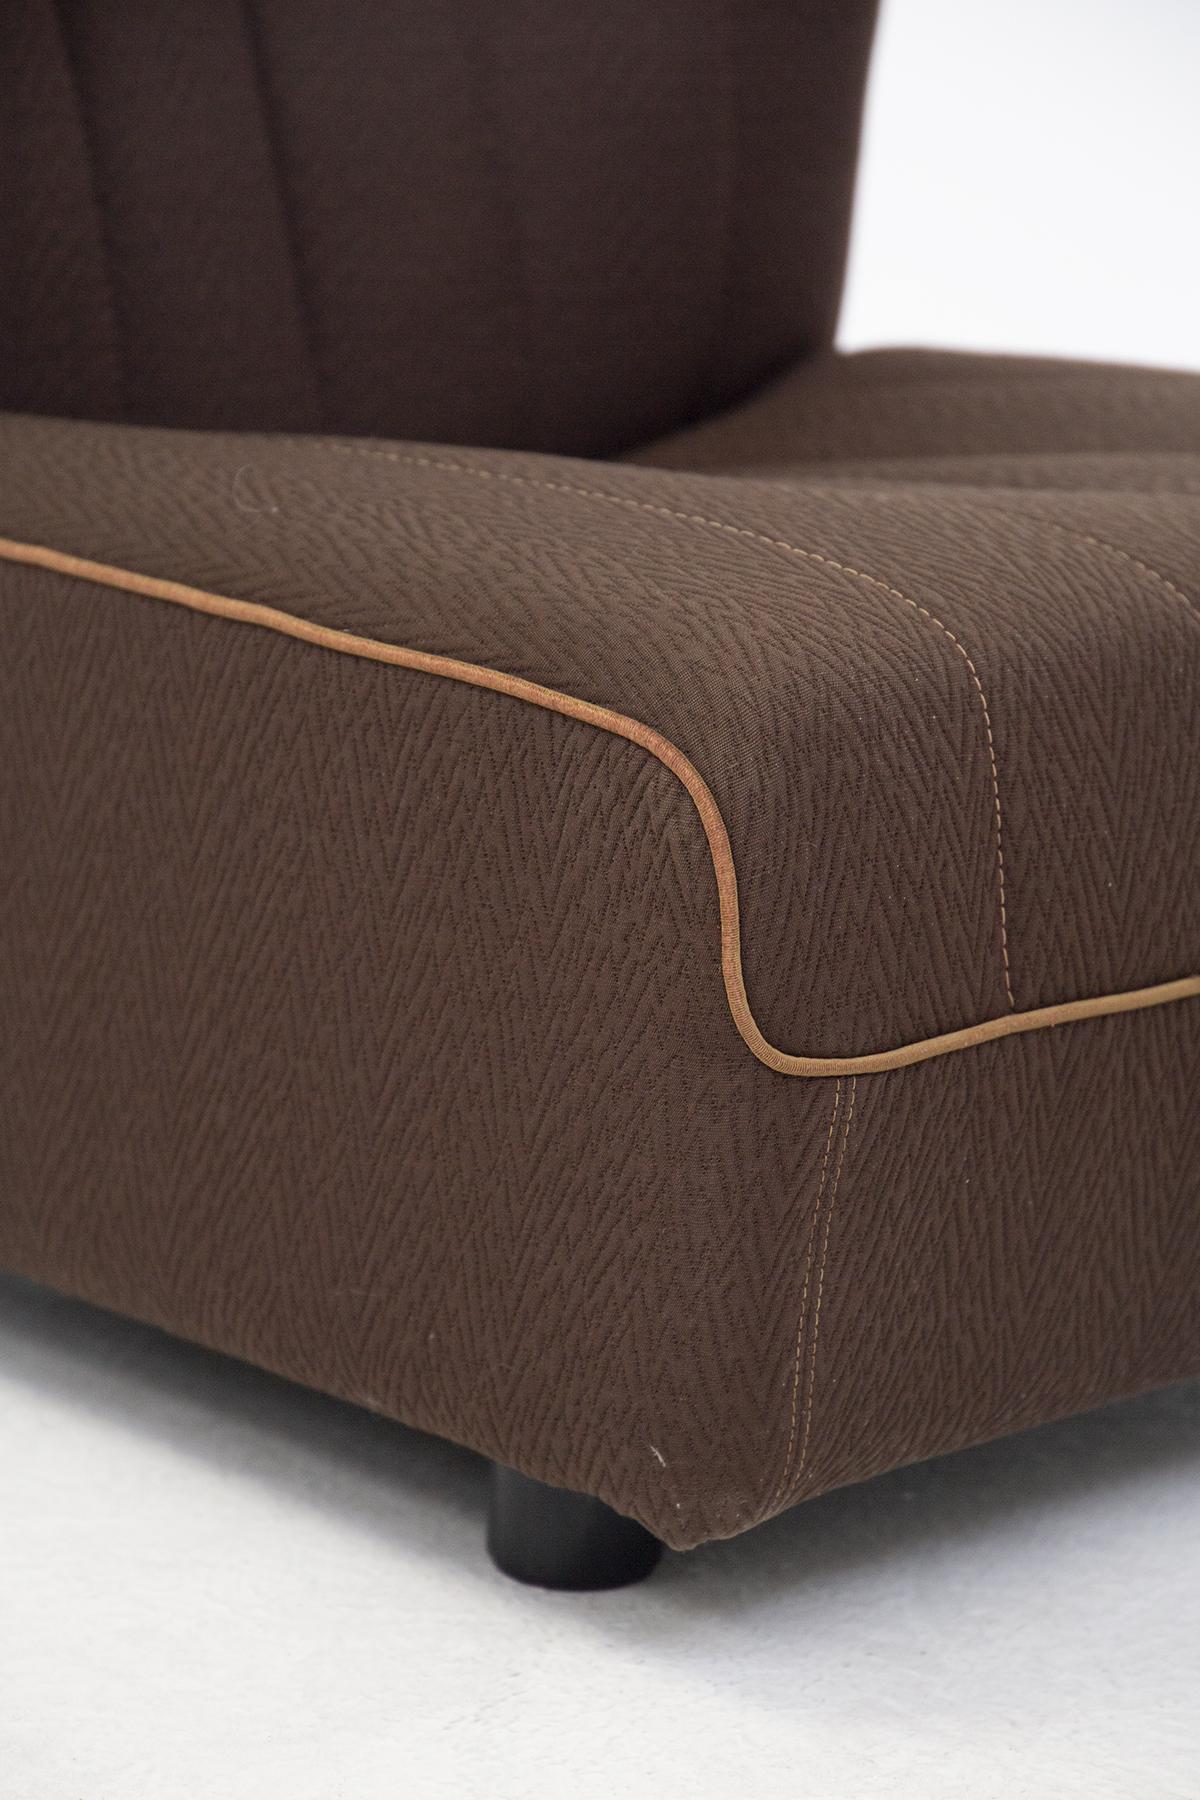 The brown fabric modular sofa was designed by Tito Agnoli for the fine Italian manufacturer Arflex in the 1960s.
The sofa is modular, i.e. it can be disassembled as you wish with respect to your needs.
The sofa is entirely made of brown fabric